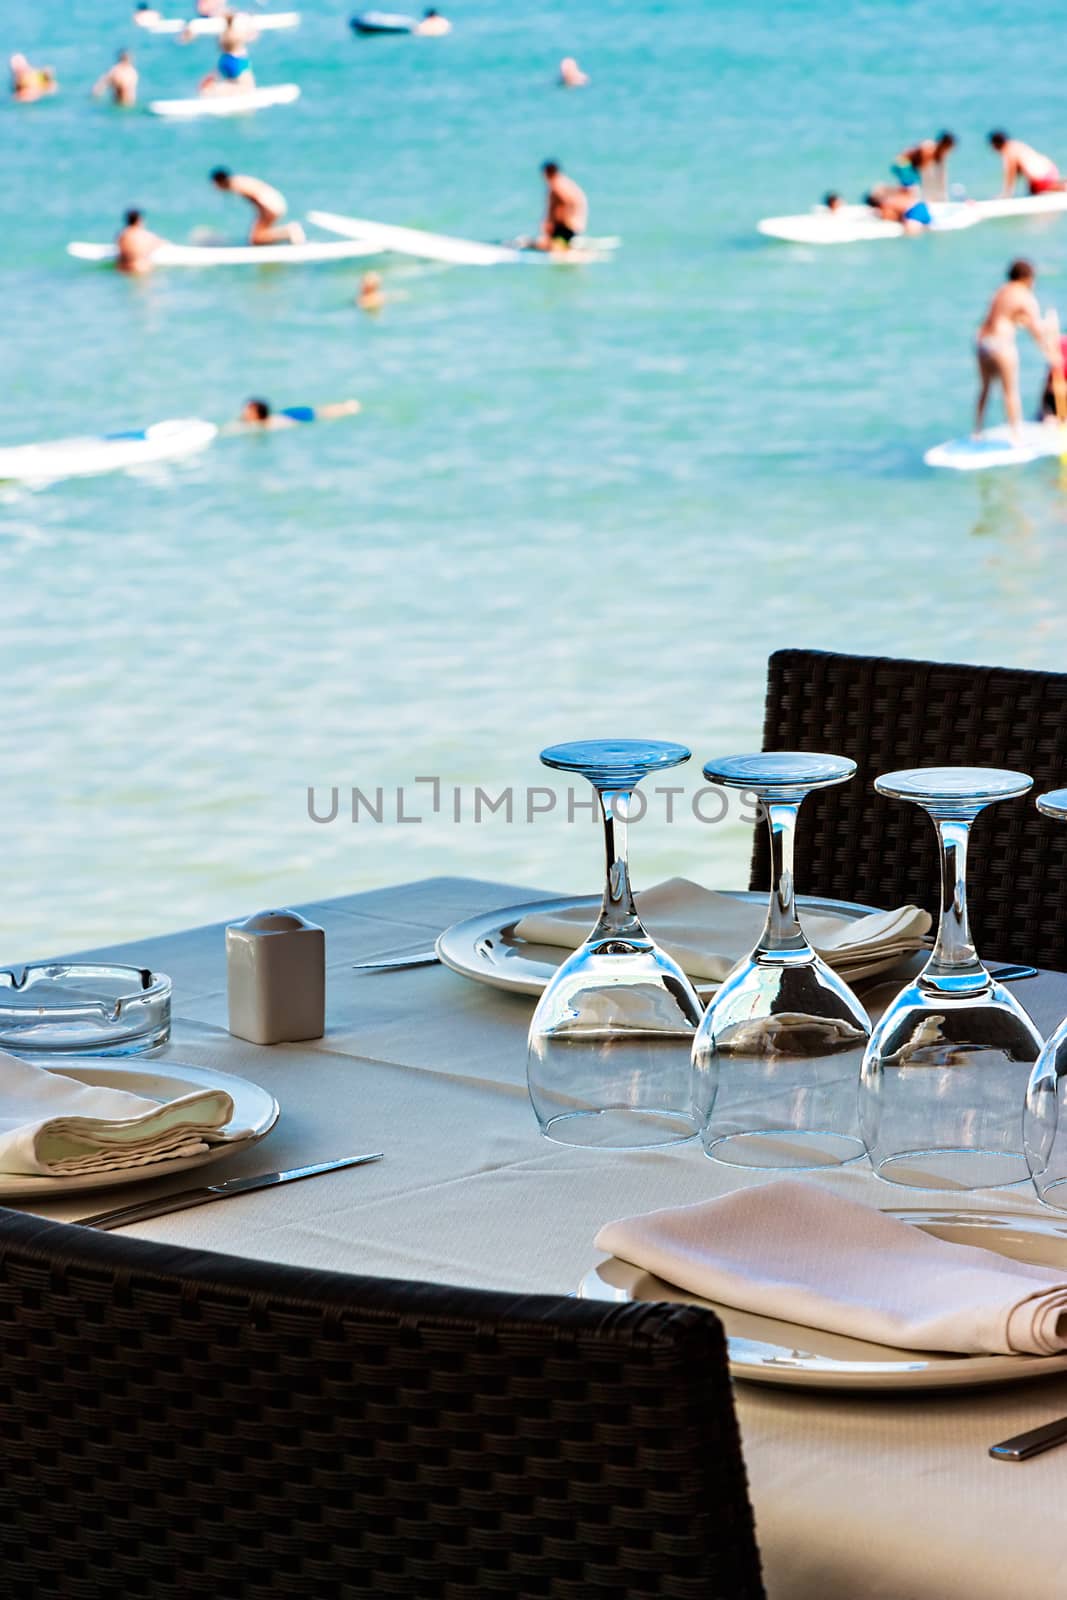 Restaurant on the seashore with the table set. Vertical image.